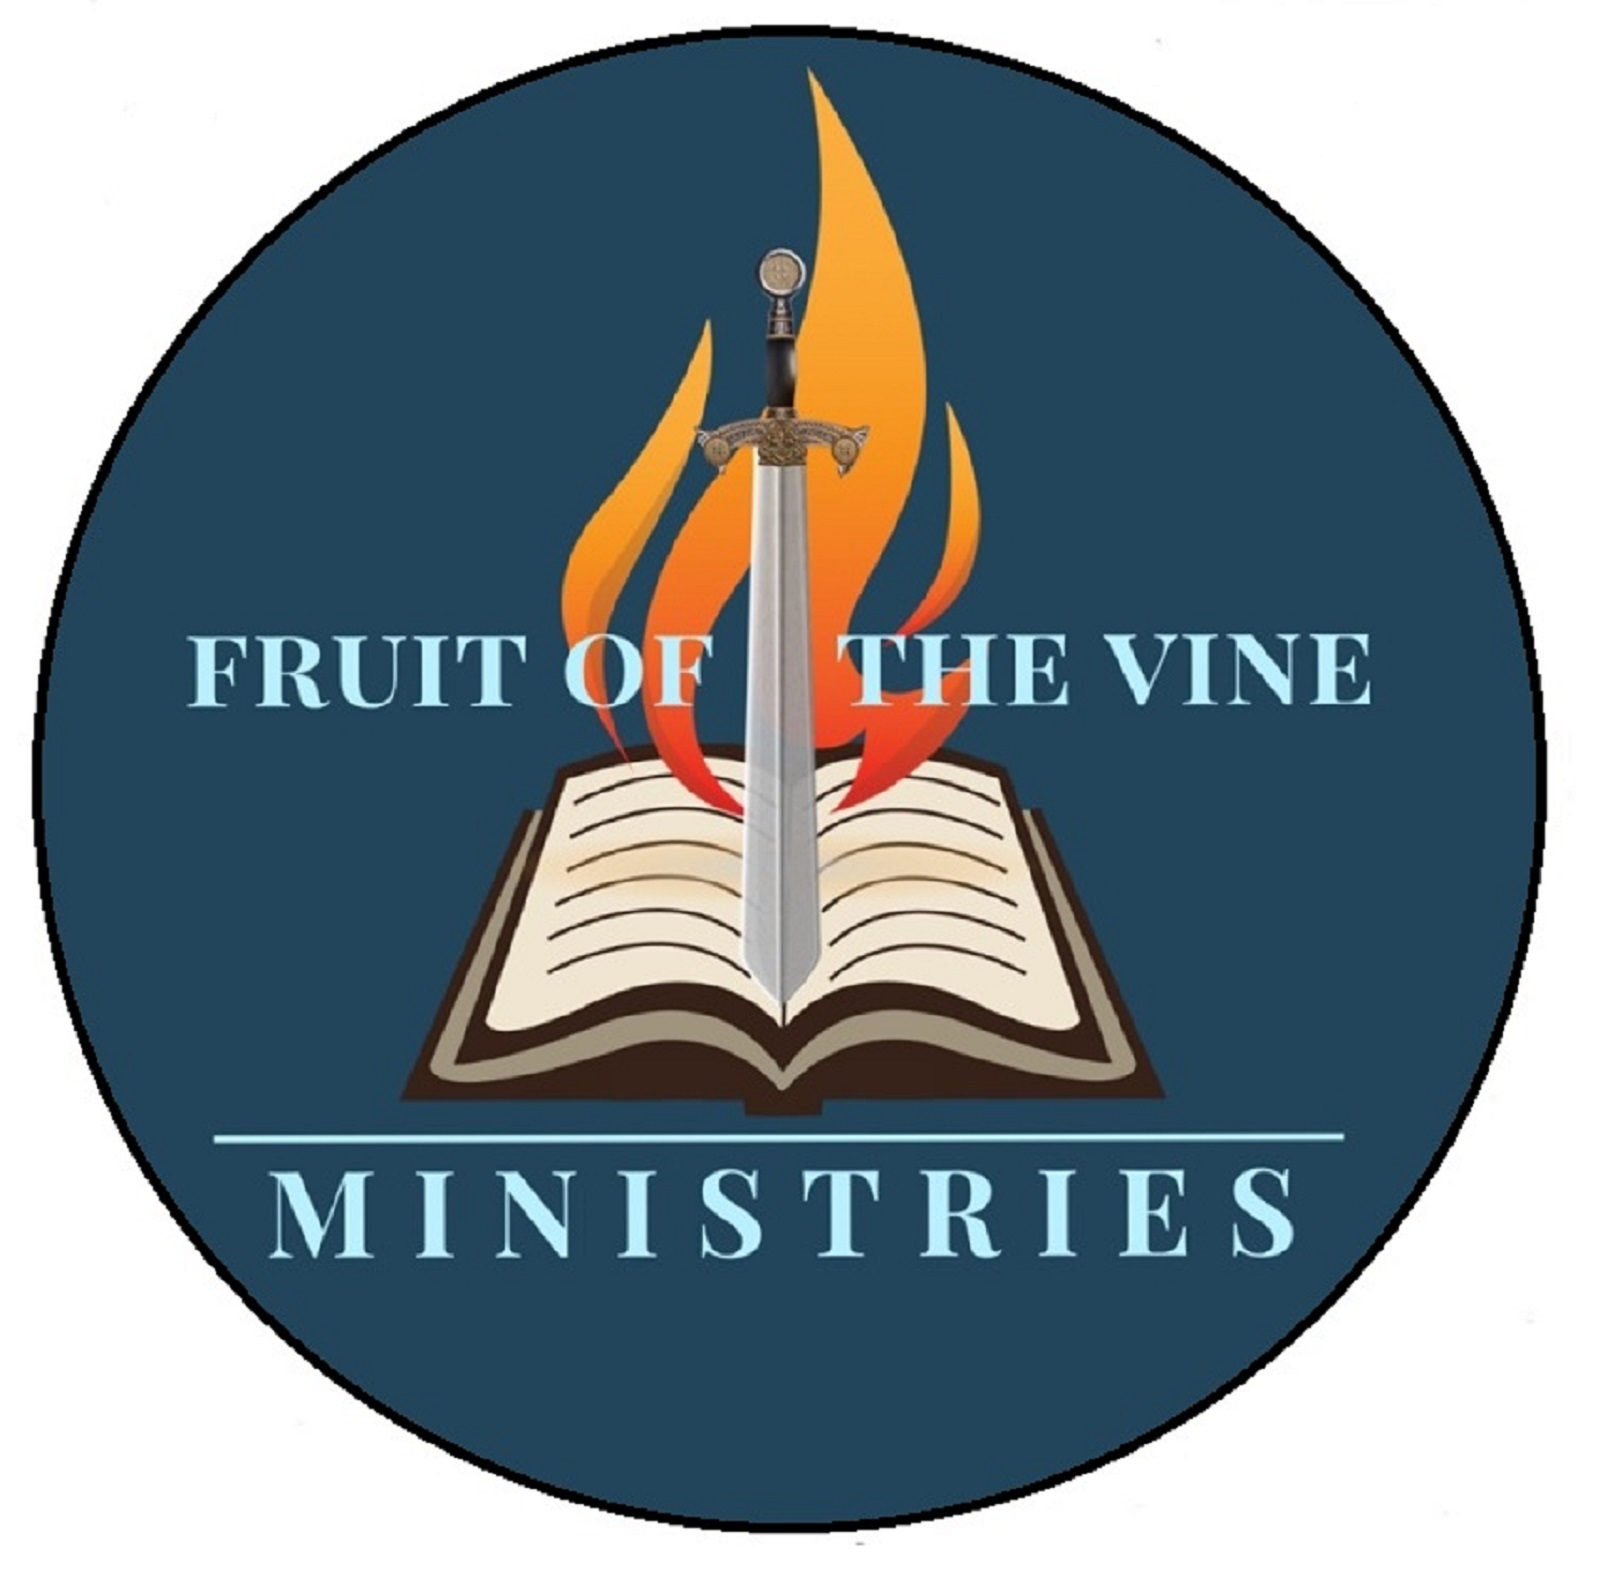 The Fruit of the Spirit is LOVE - Part 1 of the Fruit of the Spirit Series